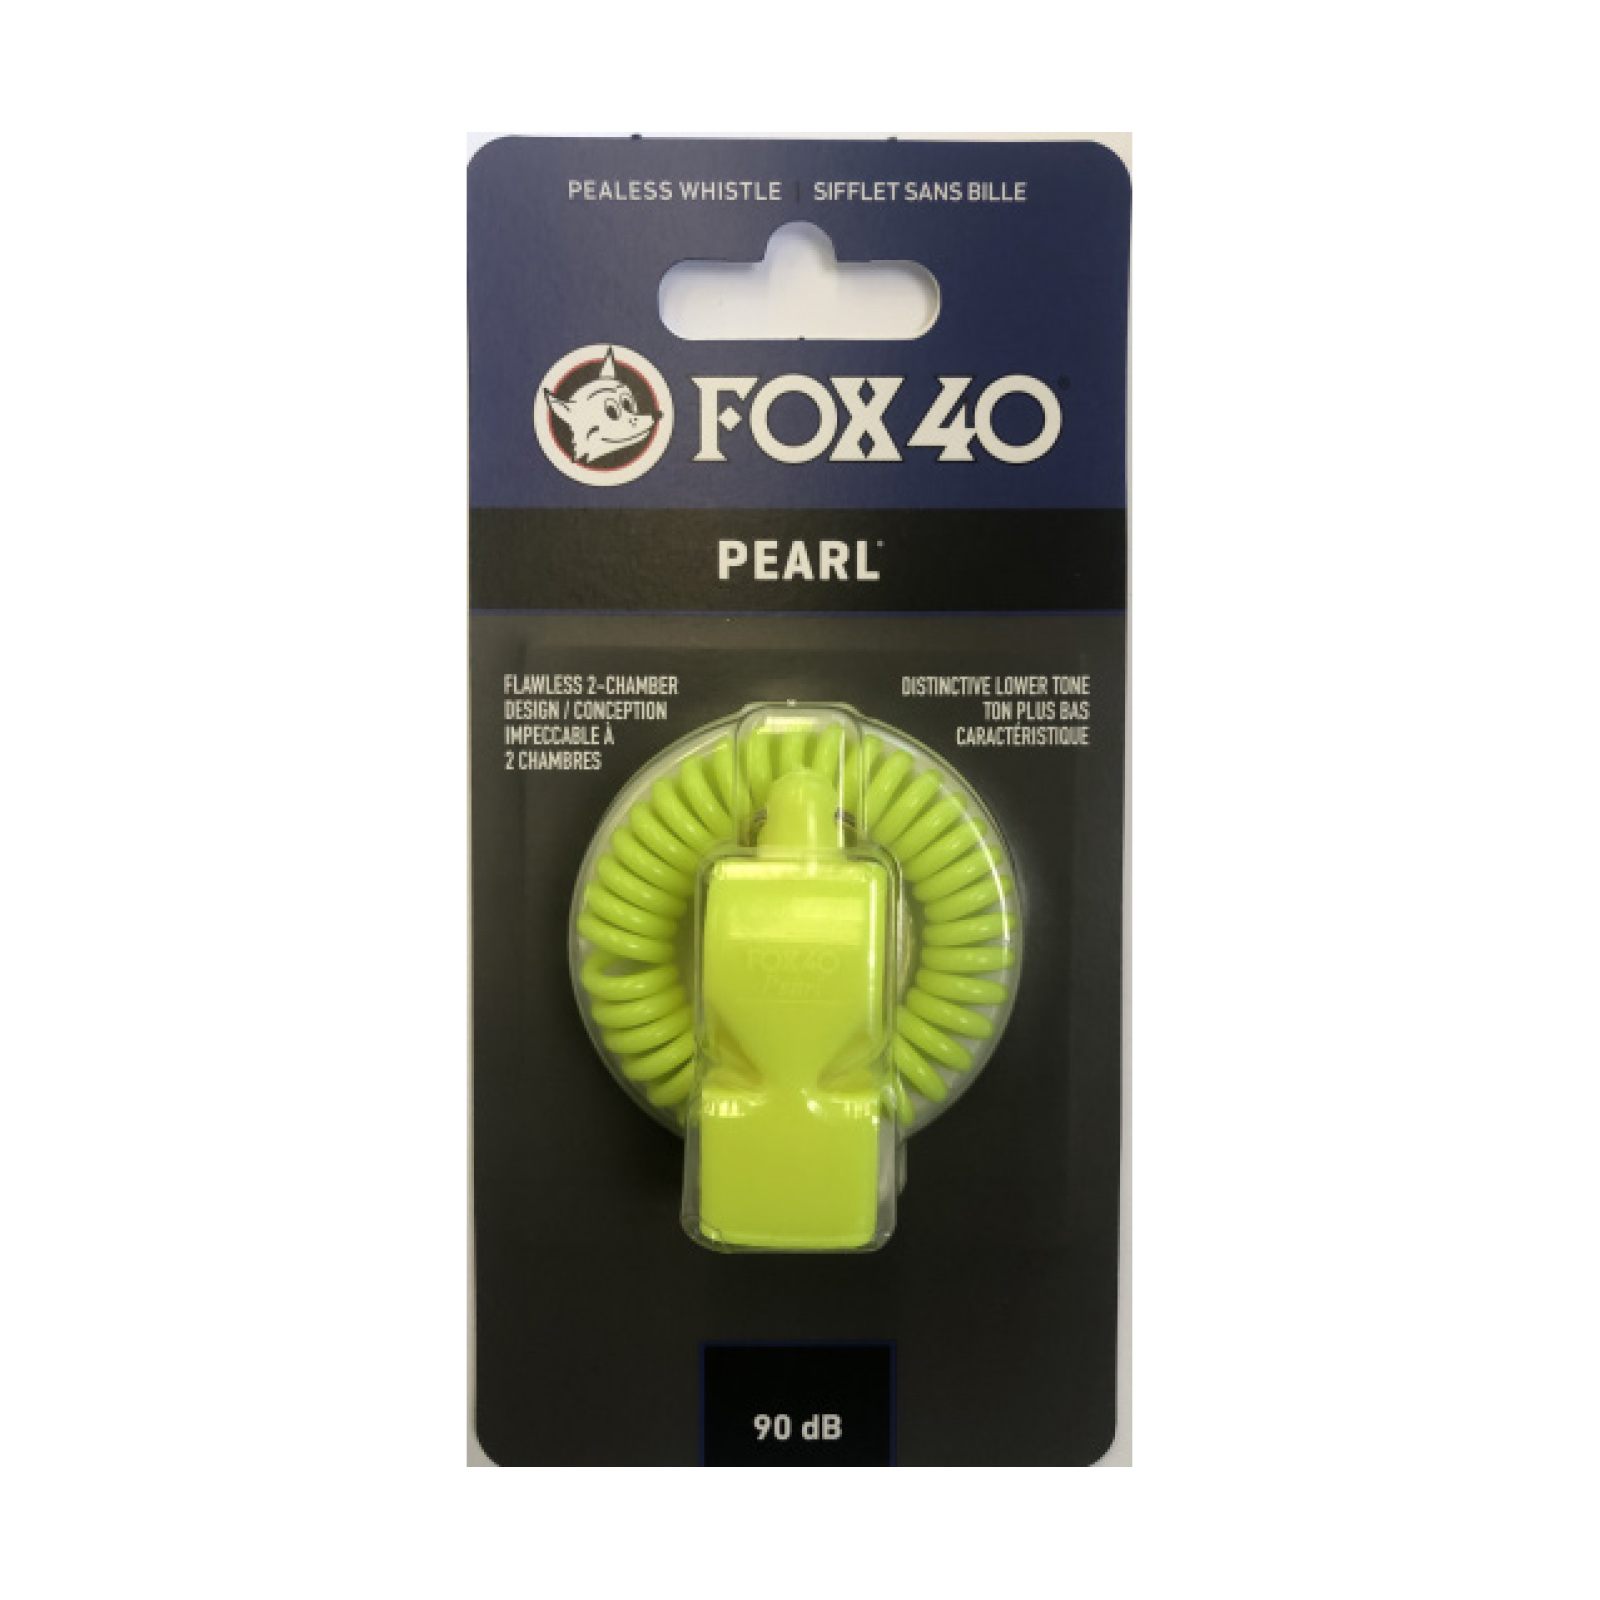 Fox 40 Pearl with Wrist Coil Whistle